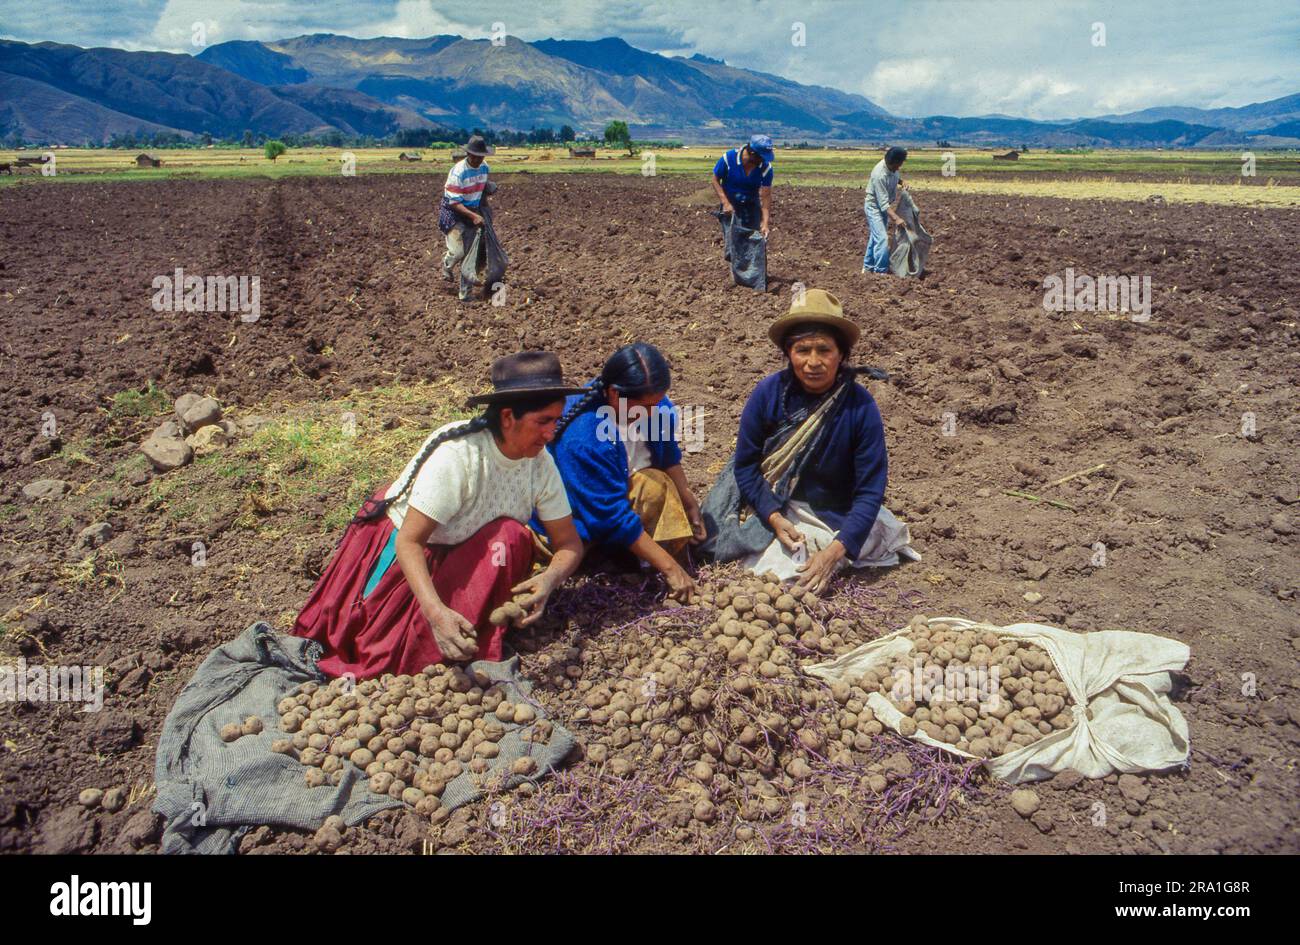 Peru, Cusco region; Women on the field are selecting the harvested potatoes for seed potatoes, while men keep harvesting. Stock Photo